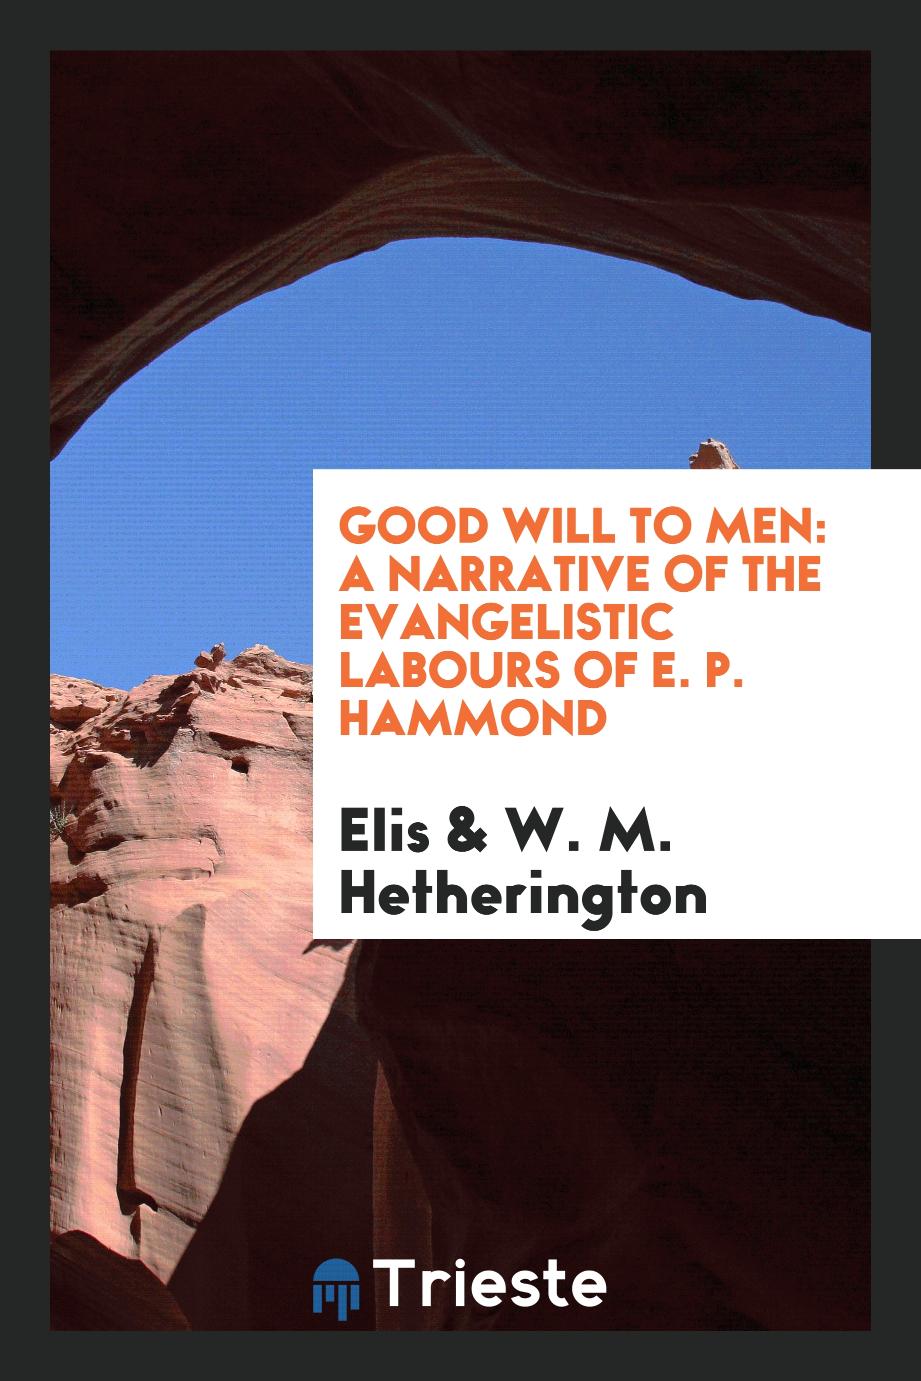 Good Will to Men: A Narrative of the Evangelistic Labours of E. P. Hammond